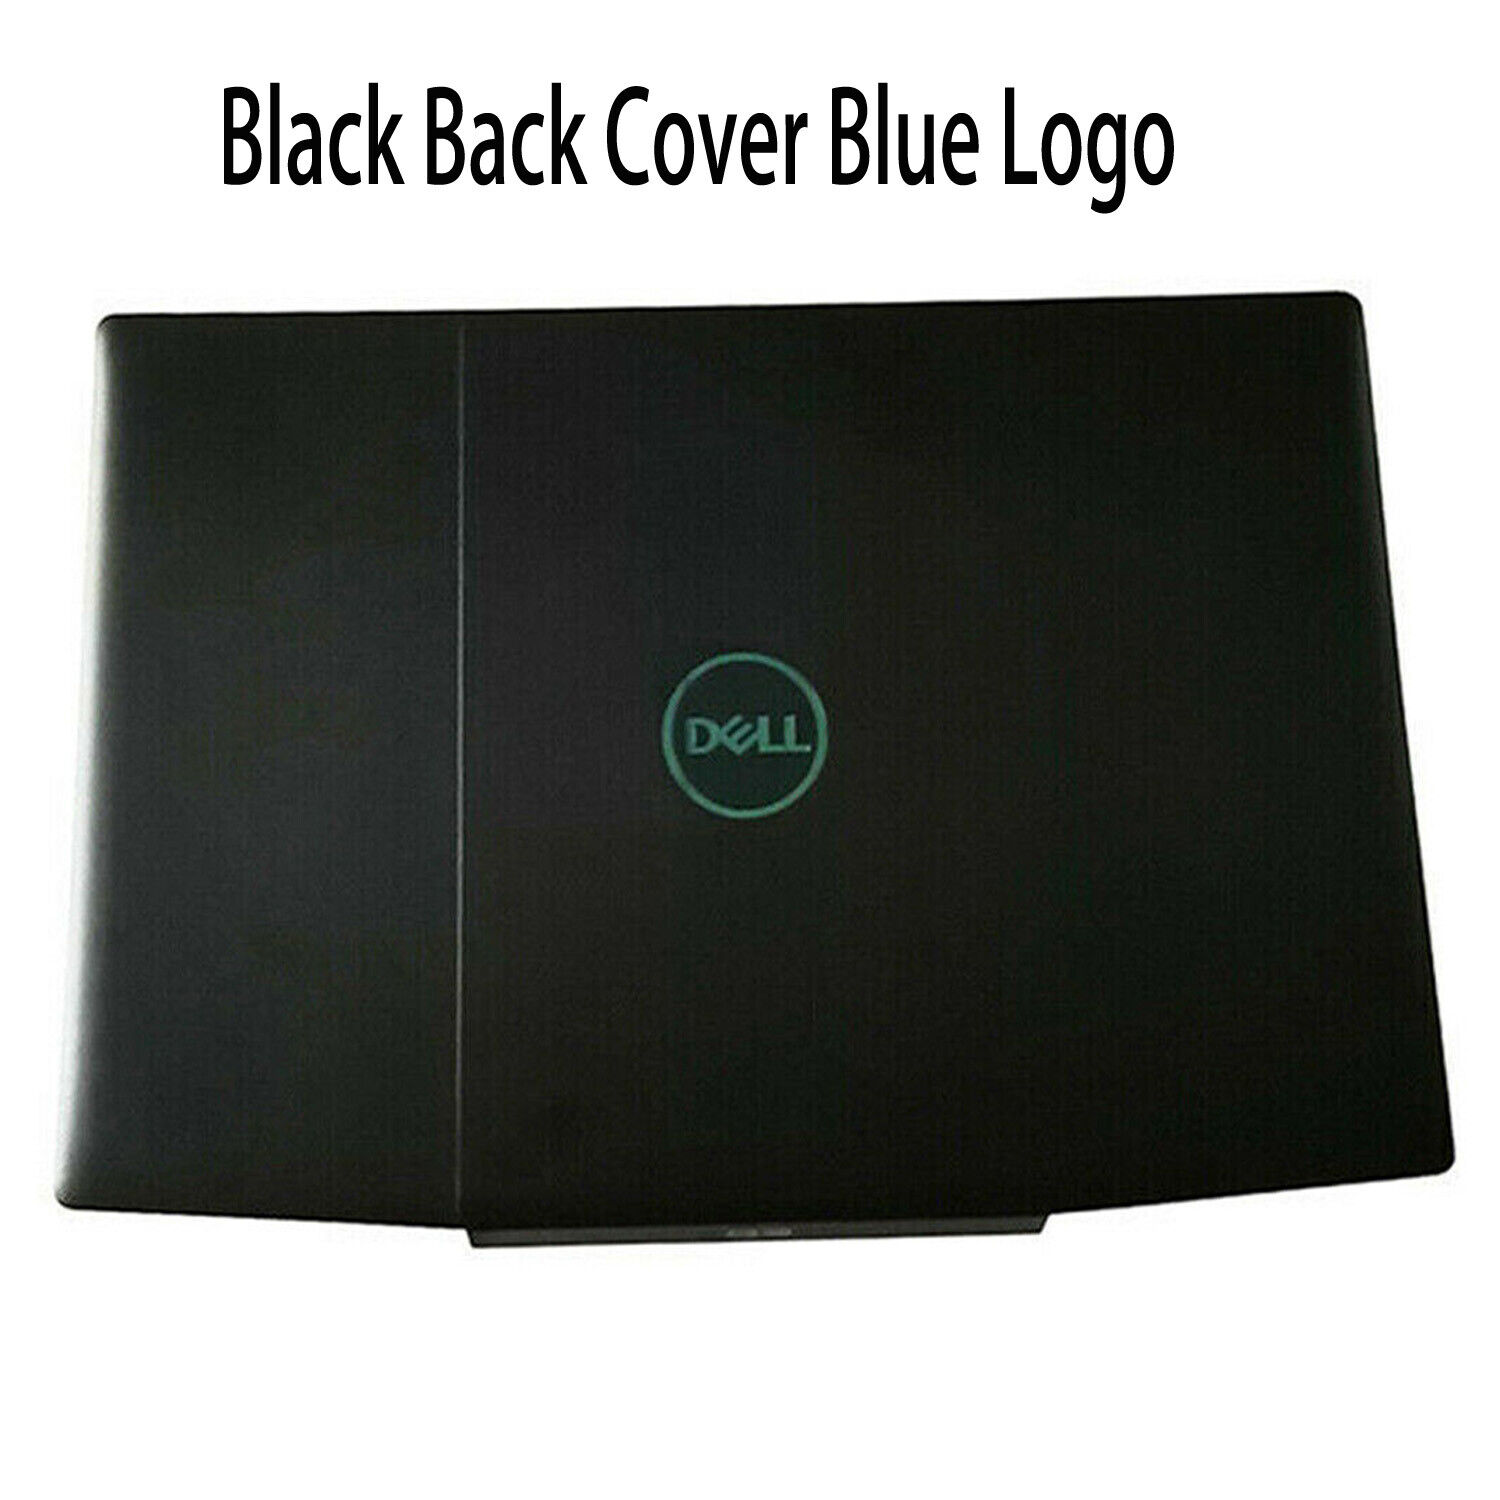 New For Dell G Series G3 15 3590 LCD Back Cover Lid Top Case Blue Logo 0747KP